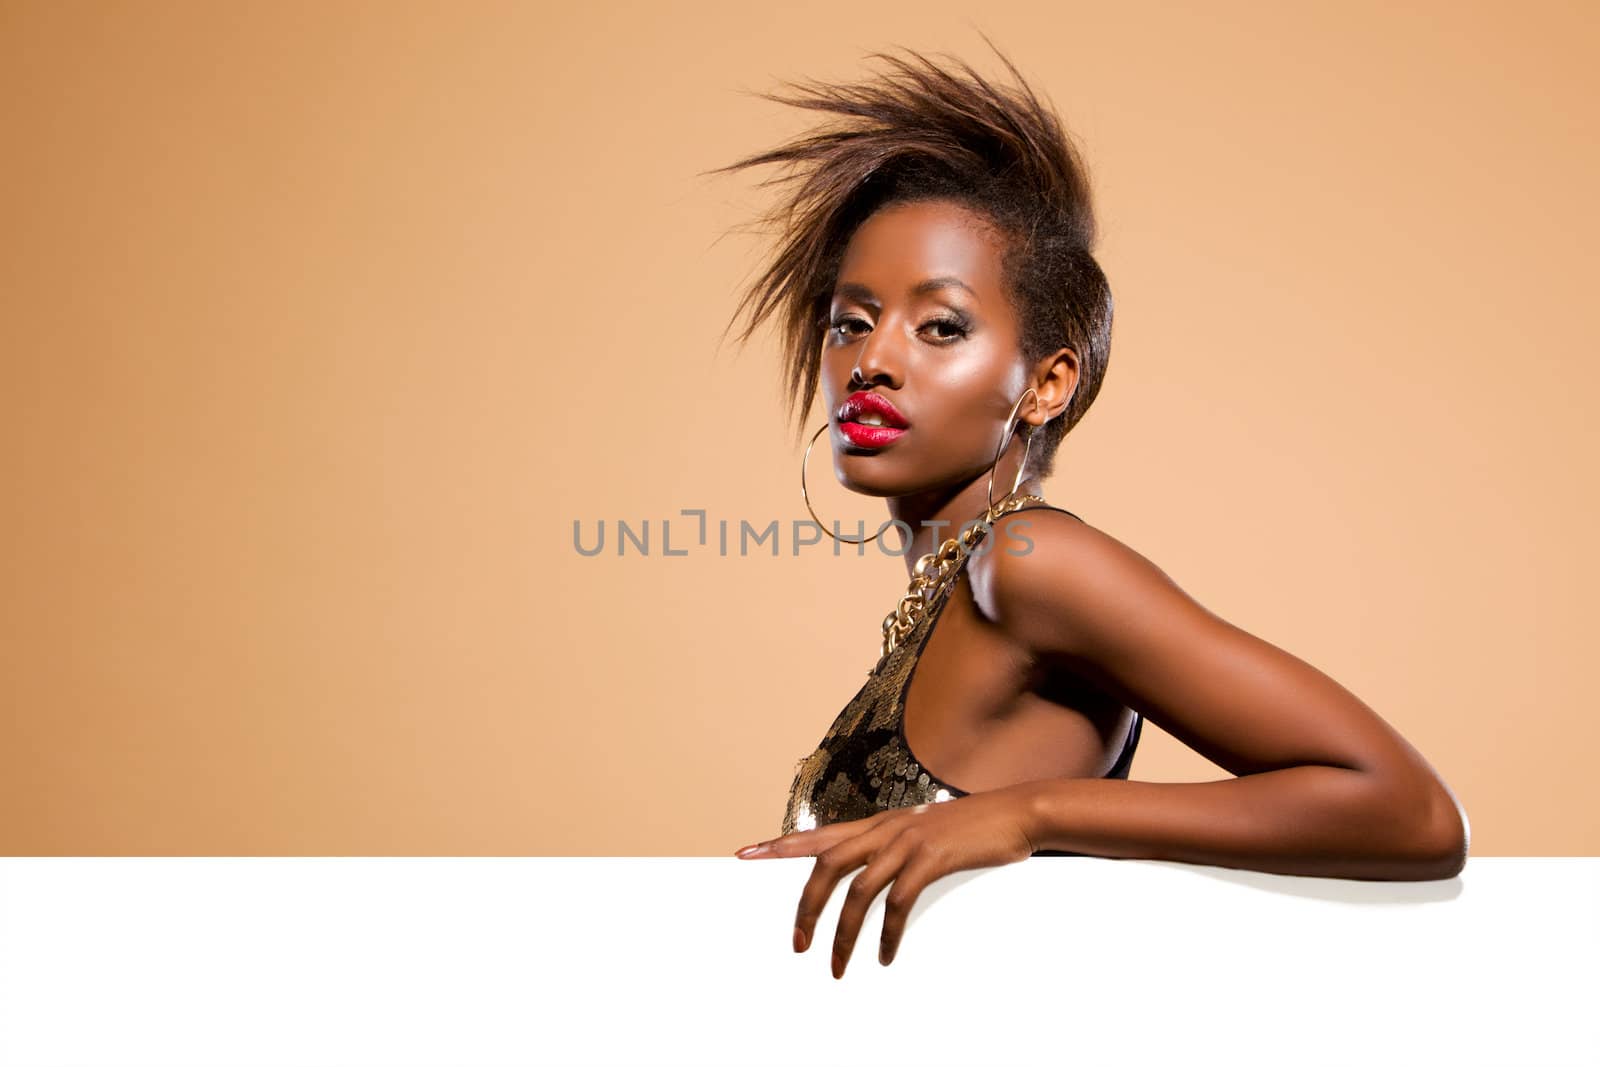 Attractive black woman model standing behind large white banner